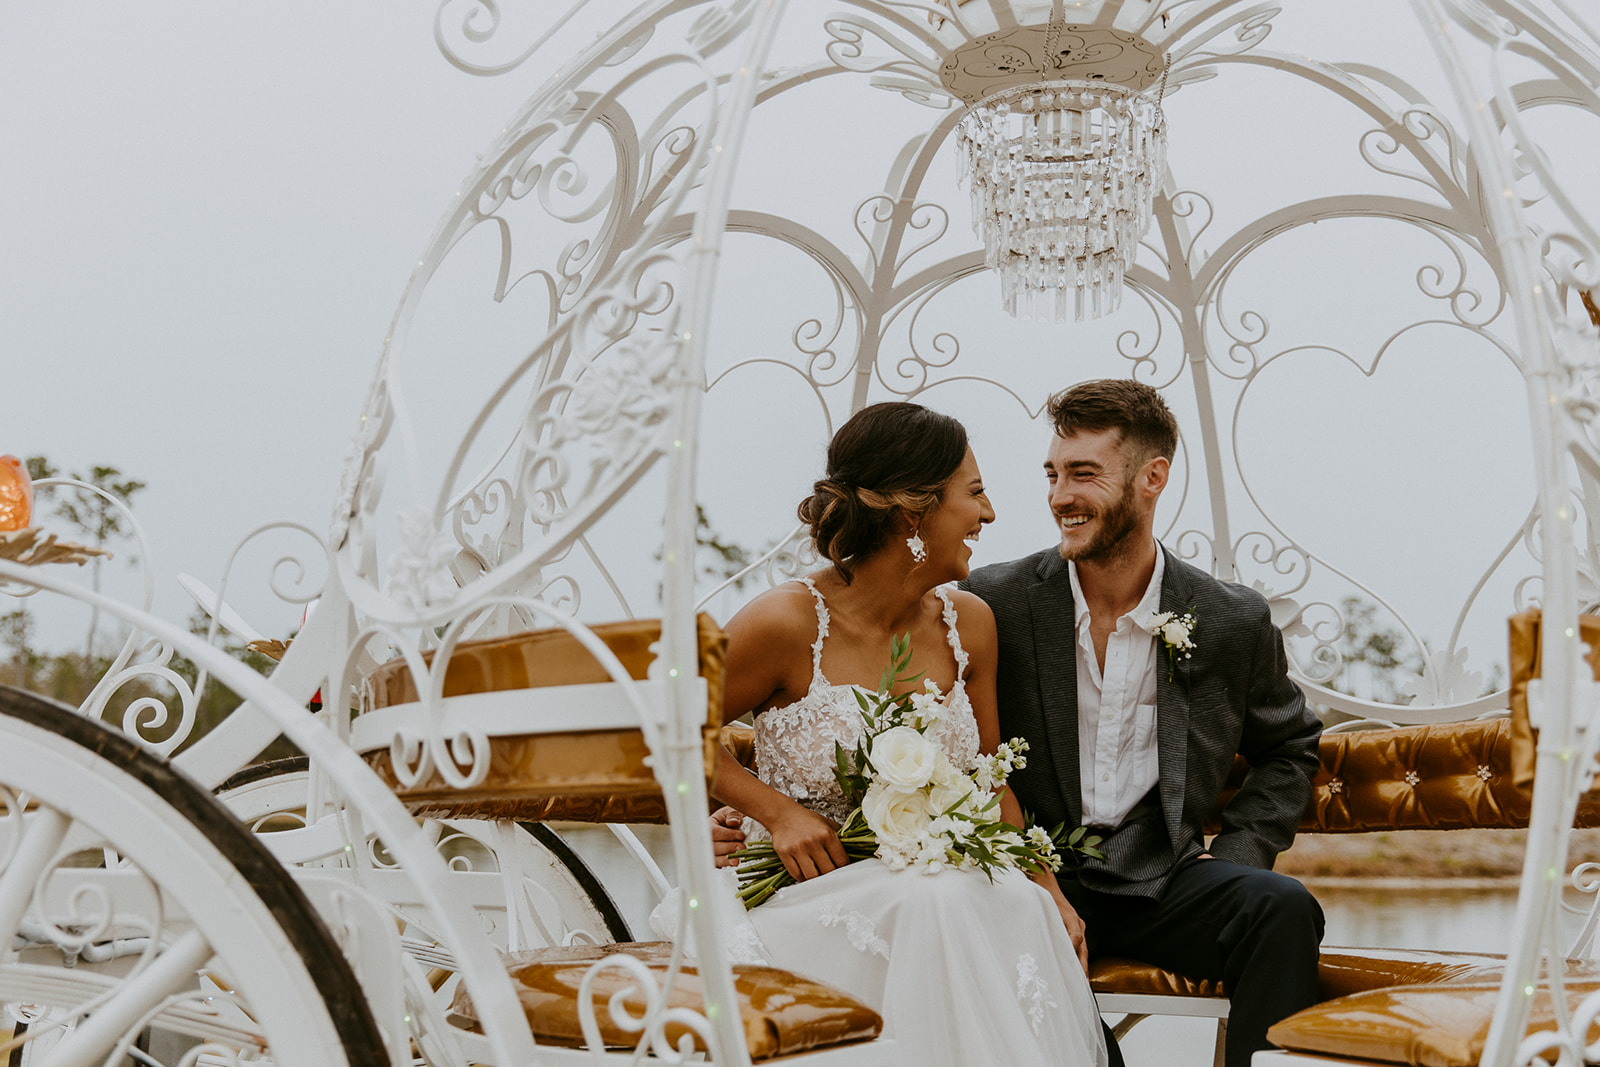 A bride and groom smiling and sitting inside an ornate white carriage with heart-shaped designs and a chandelier at Chateau 1800